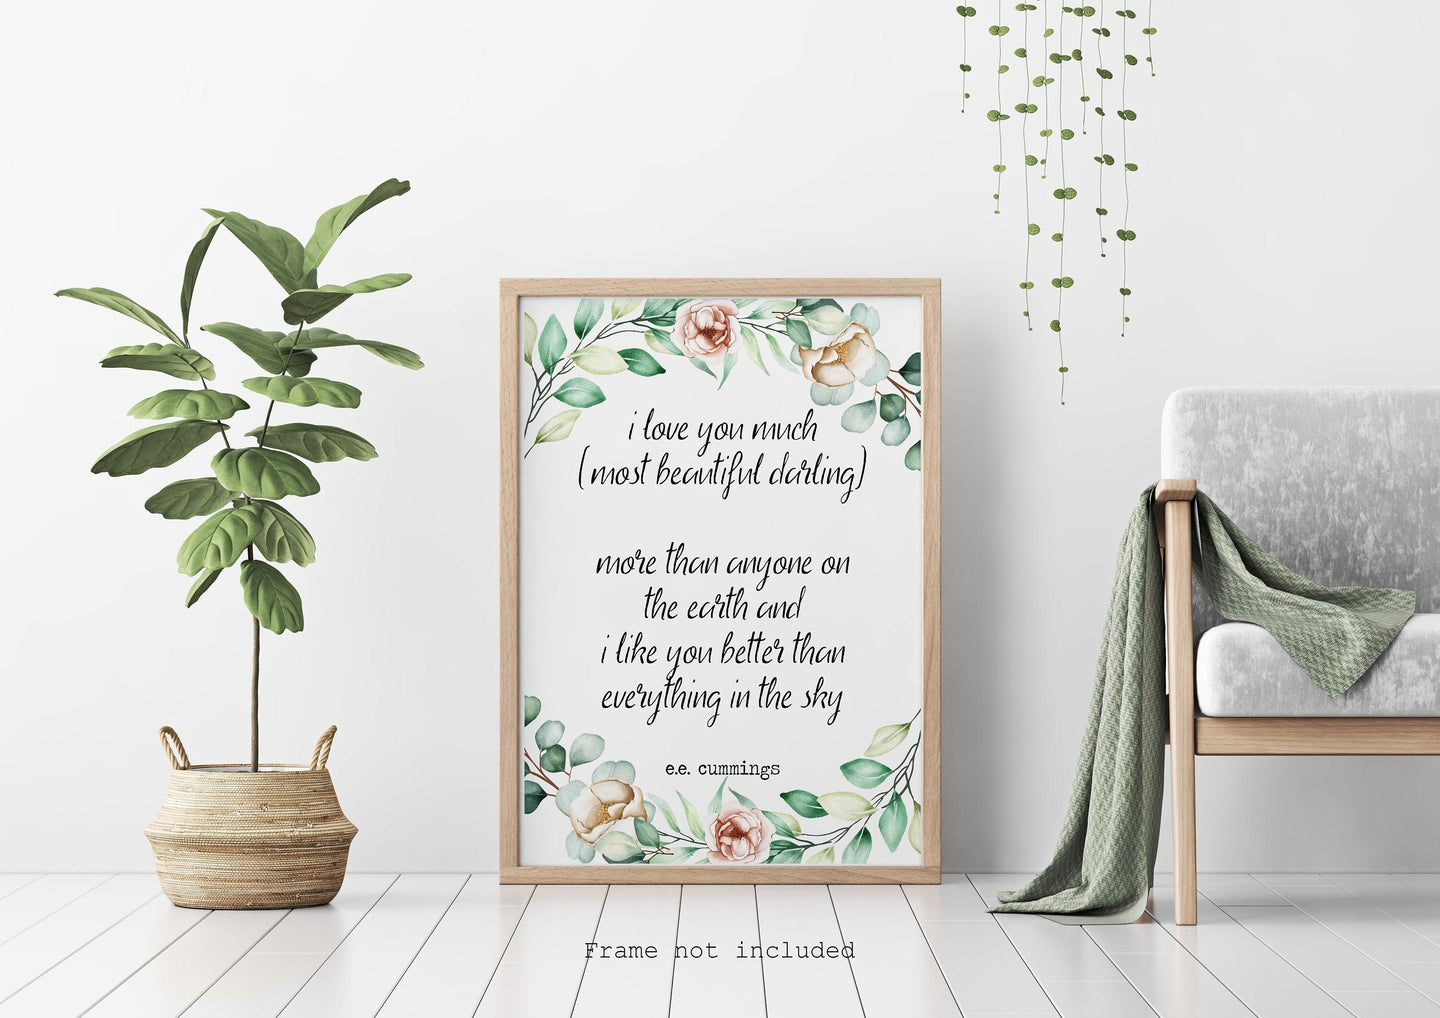 e.e. cummings quote - i love you much(most beautiful darling) Art Print Home Decor poetry wall art UNFRAMED